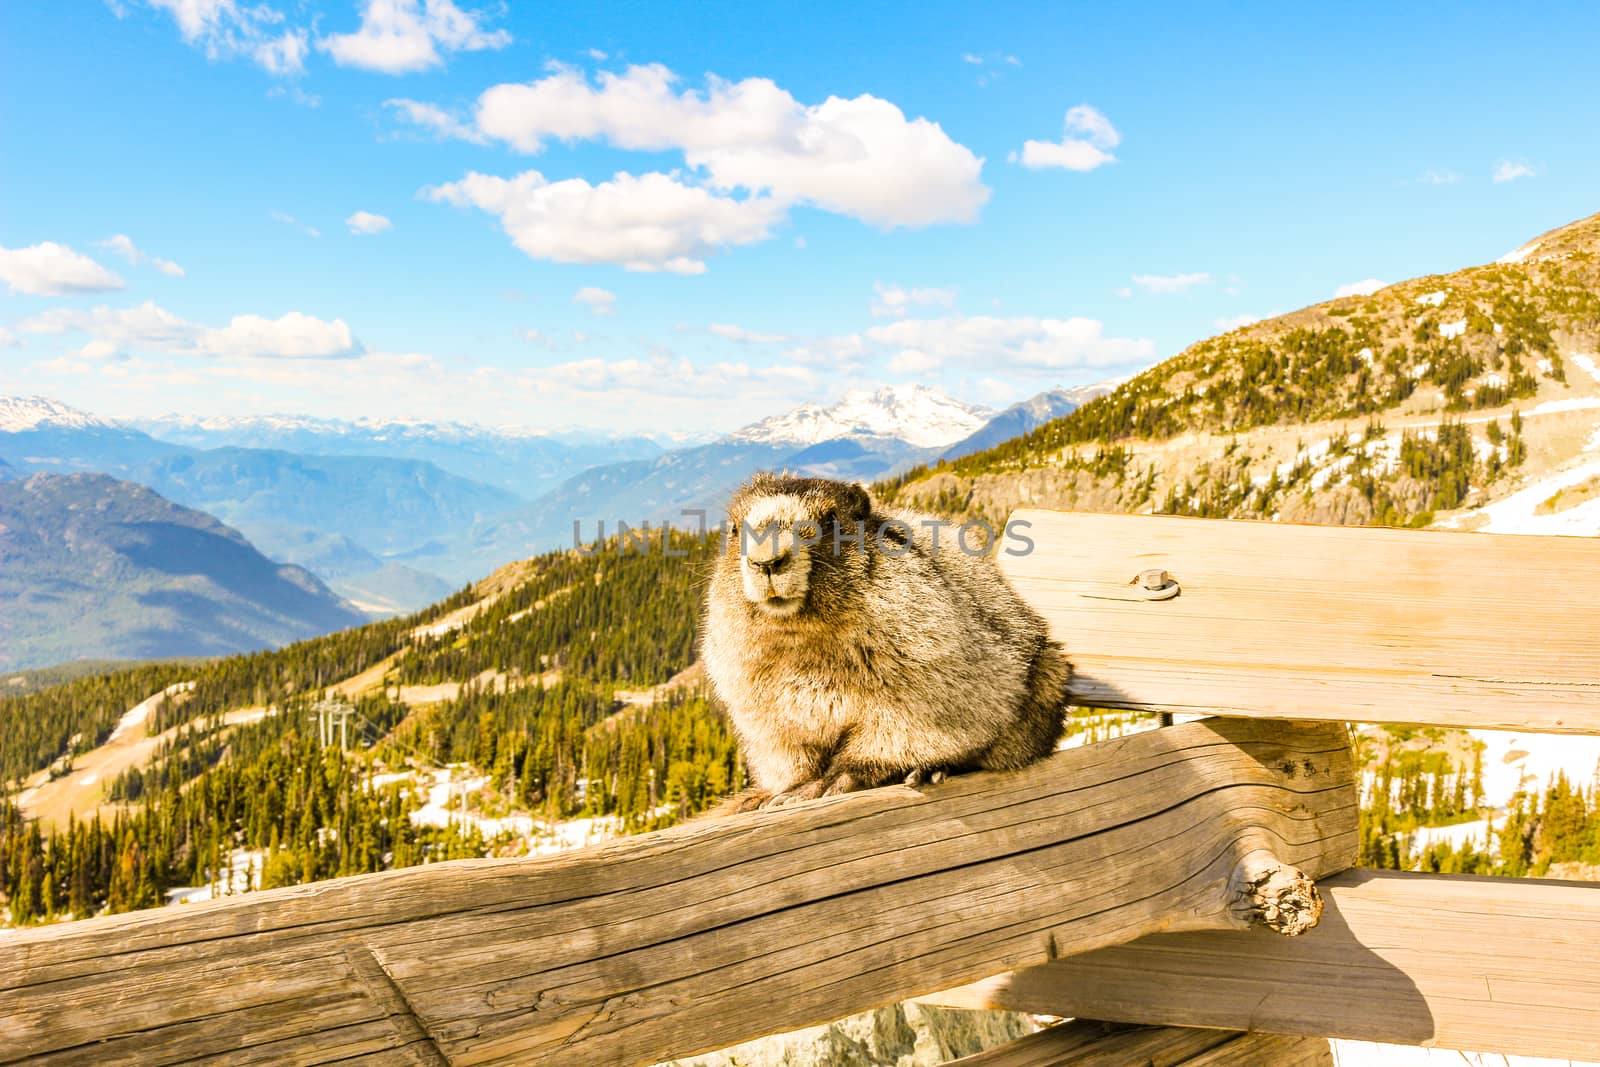 A Hoary marmot on a mountain with a beautiful mountain backdrop by mynewturtle1